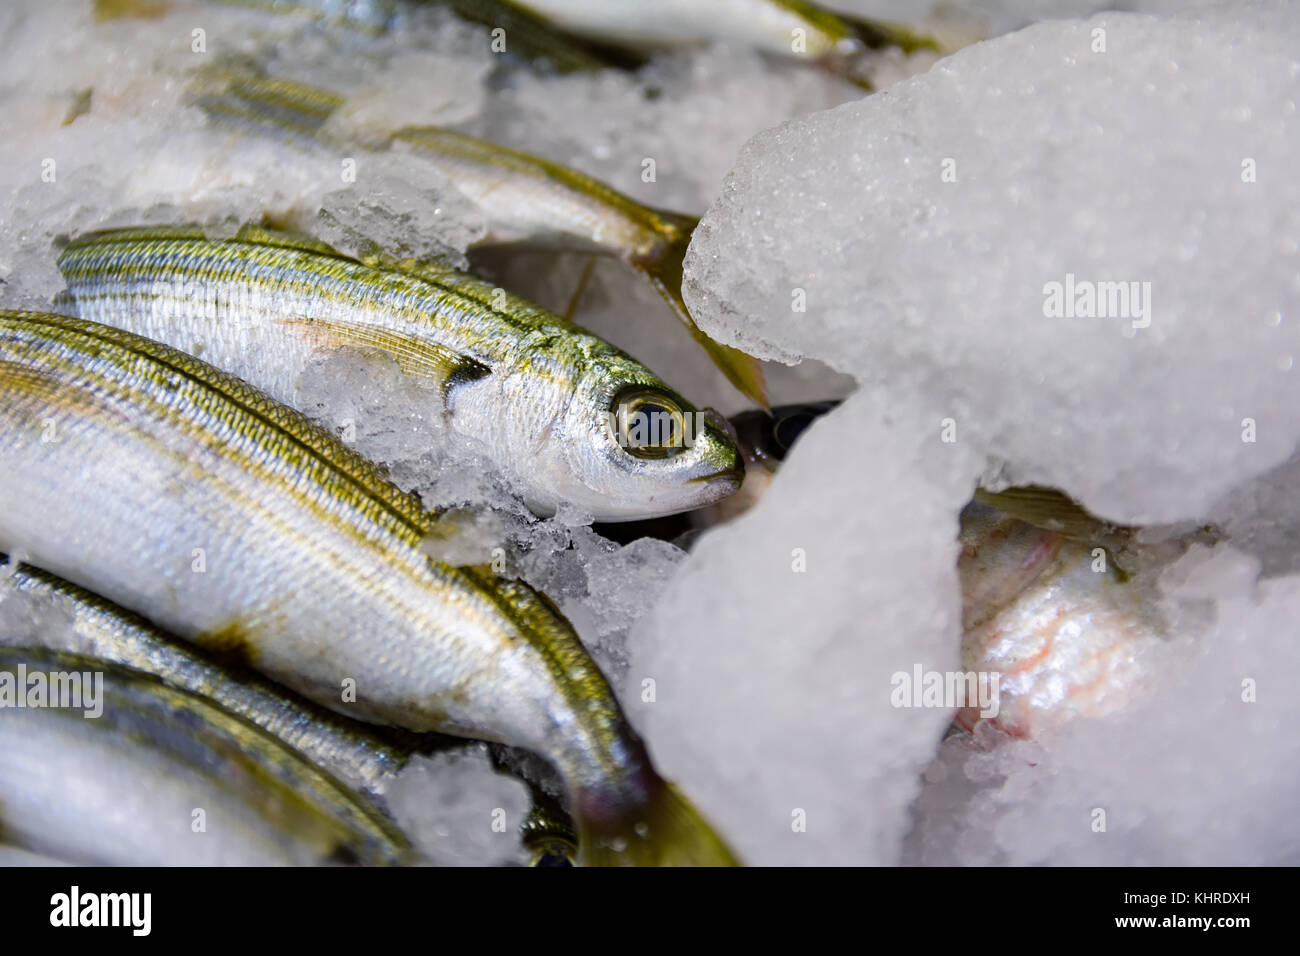 Close-Up Of Freshly Caught Bogue Fish Or Boops Boops For Sale In The Greek Fish Market Stock Photo